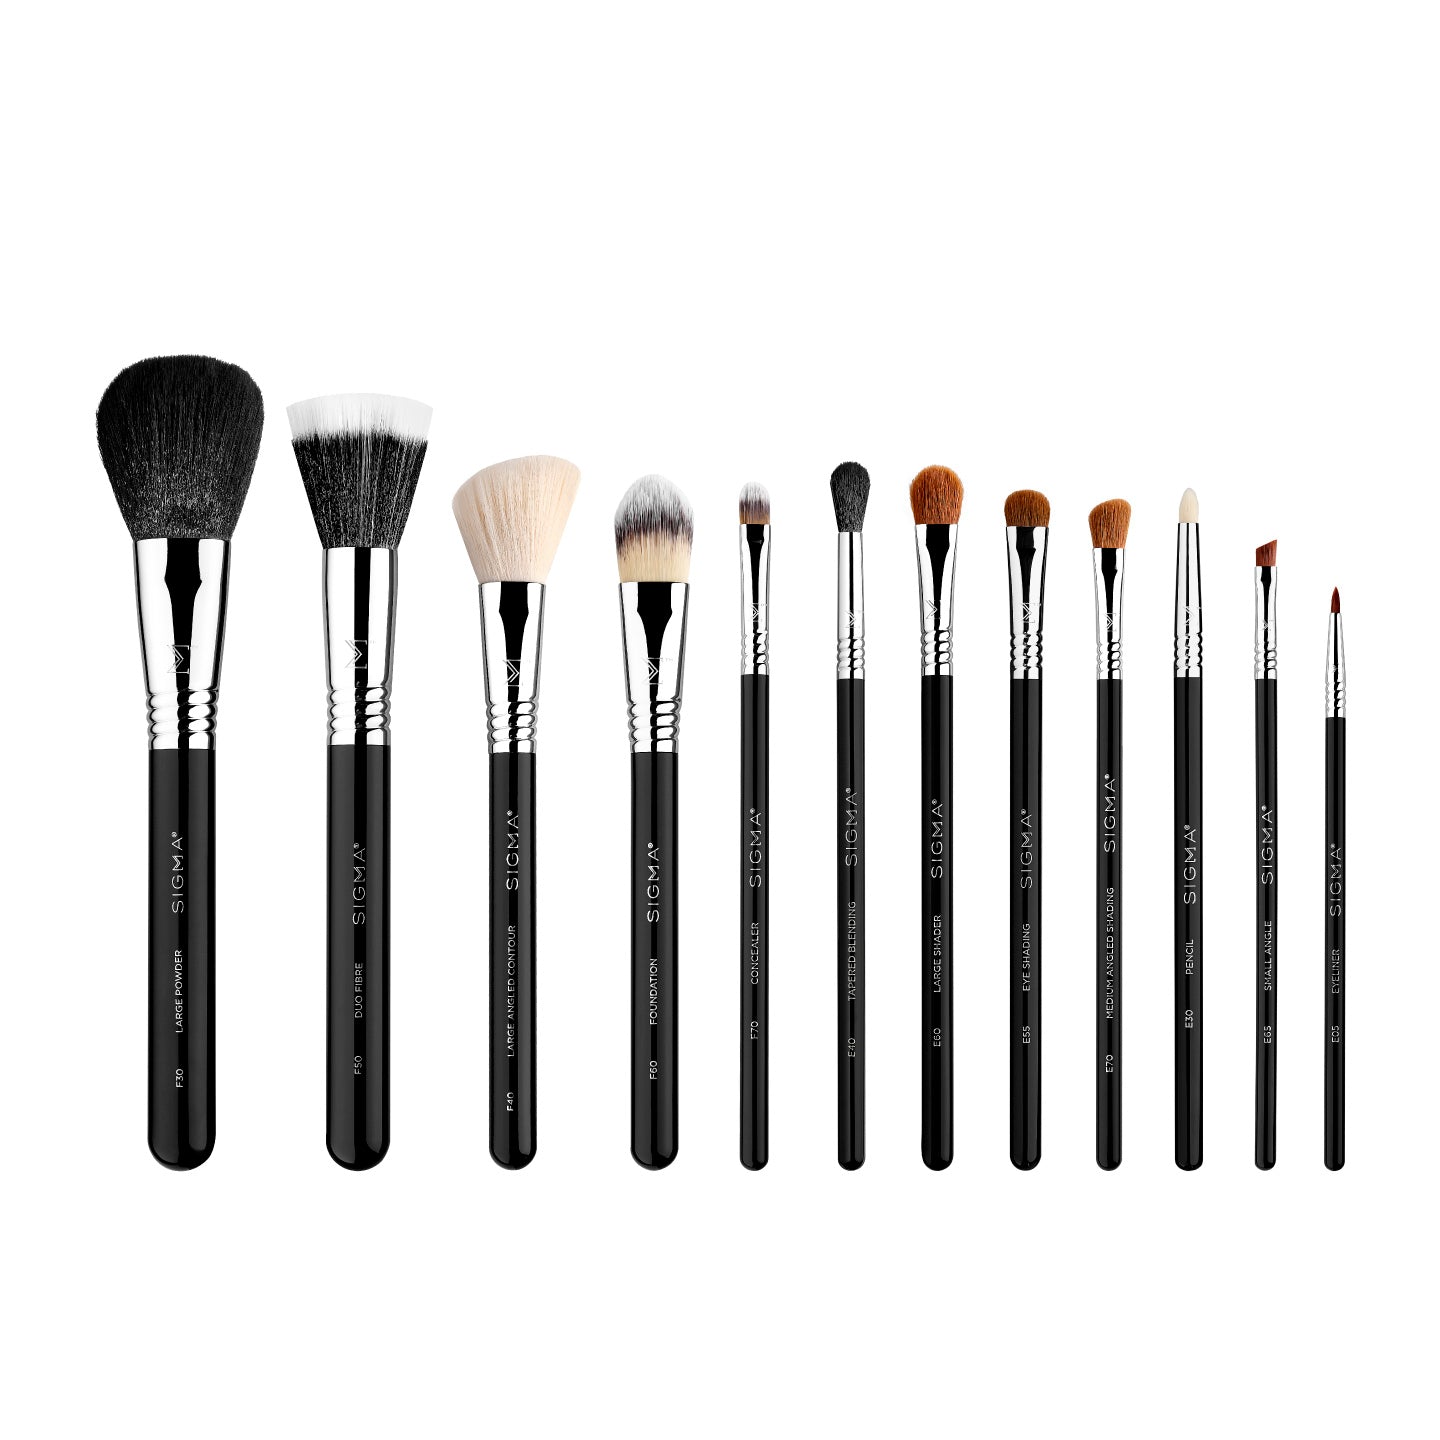 chanel cosmetic brushes